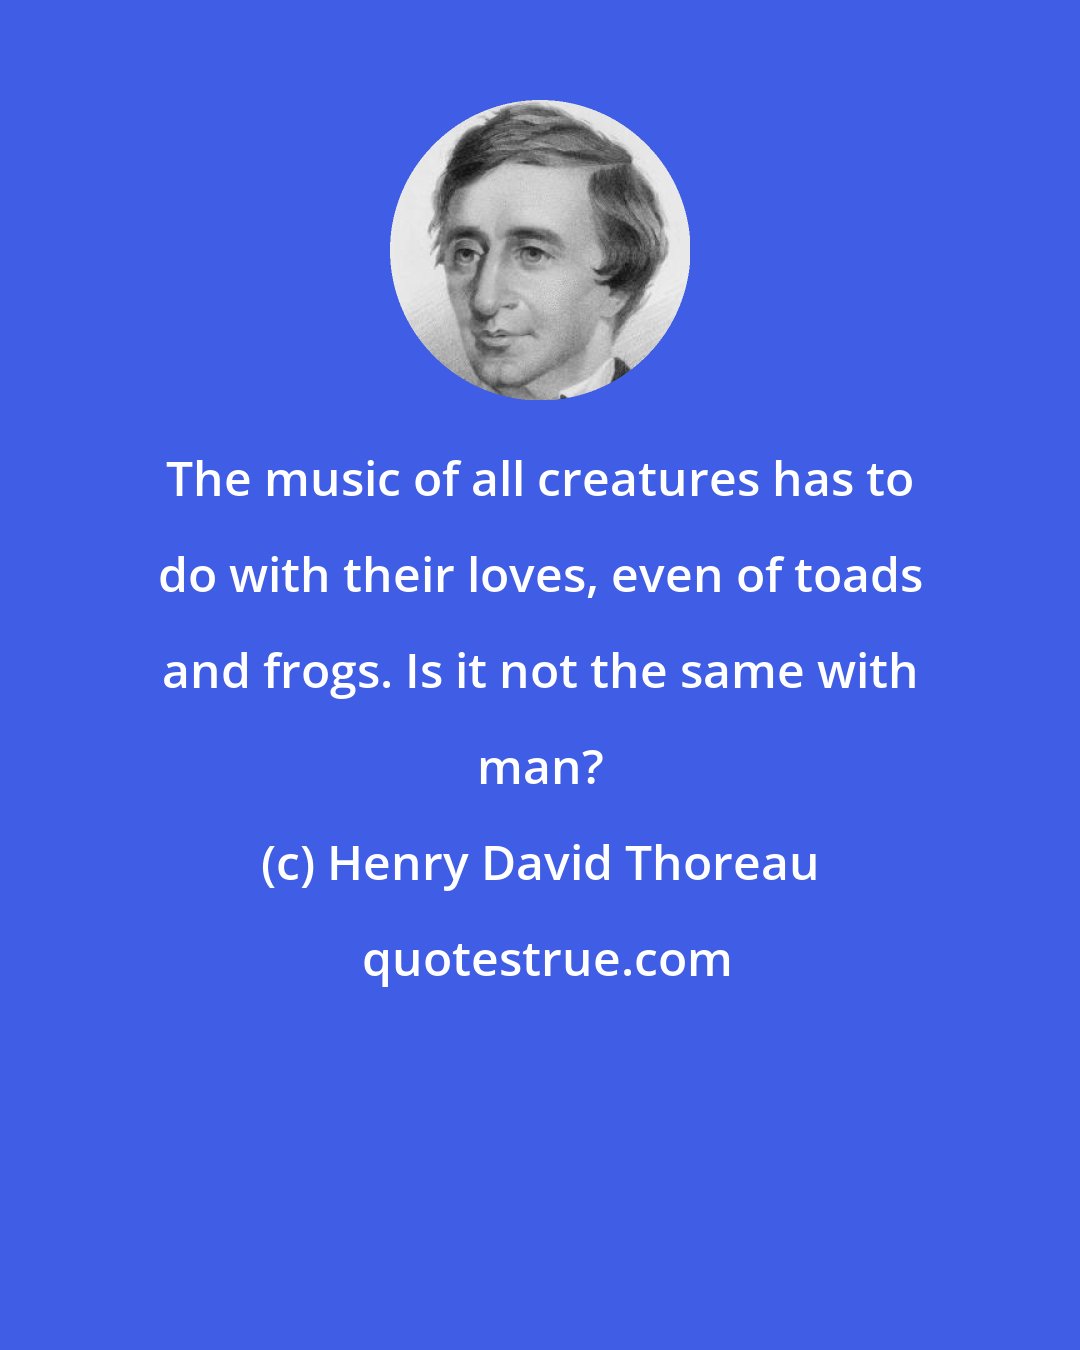 Henry David Thoreau: The music of all creatures has to do with their loves, even of toads and frogs. Is it not the same with man?